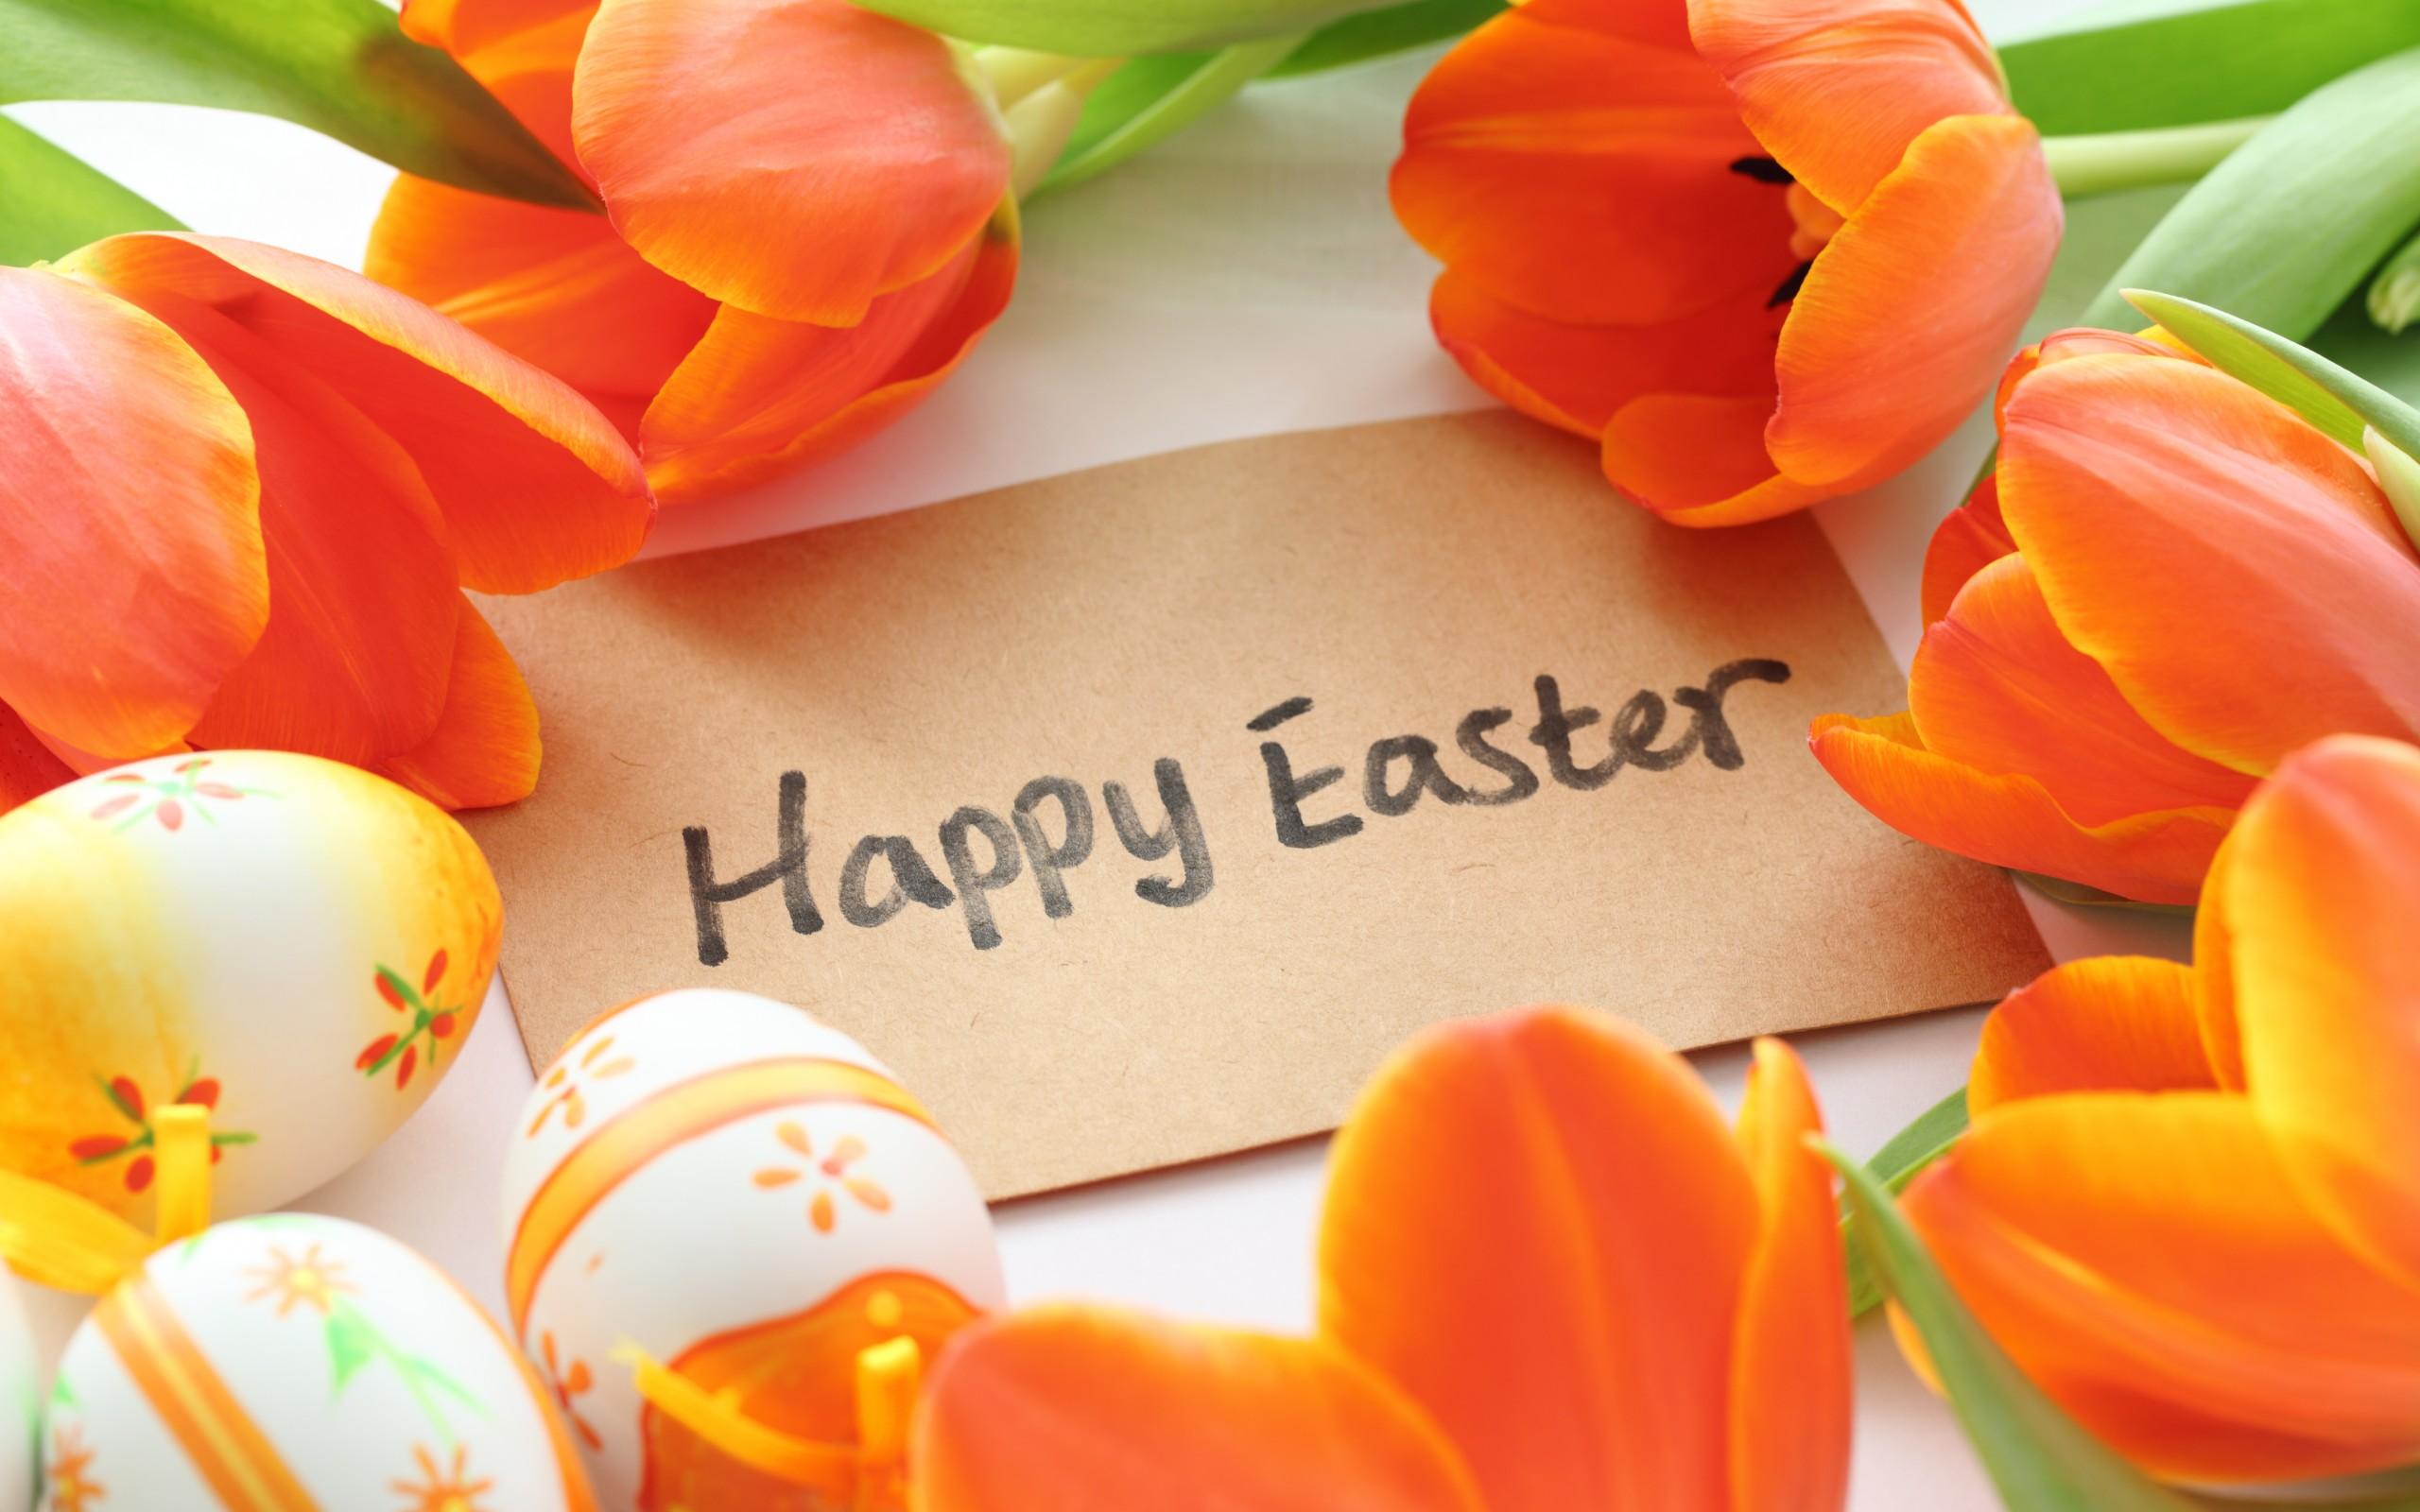 Happy Easter 2019 Greetings Card Messages